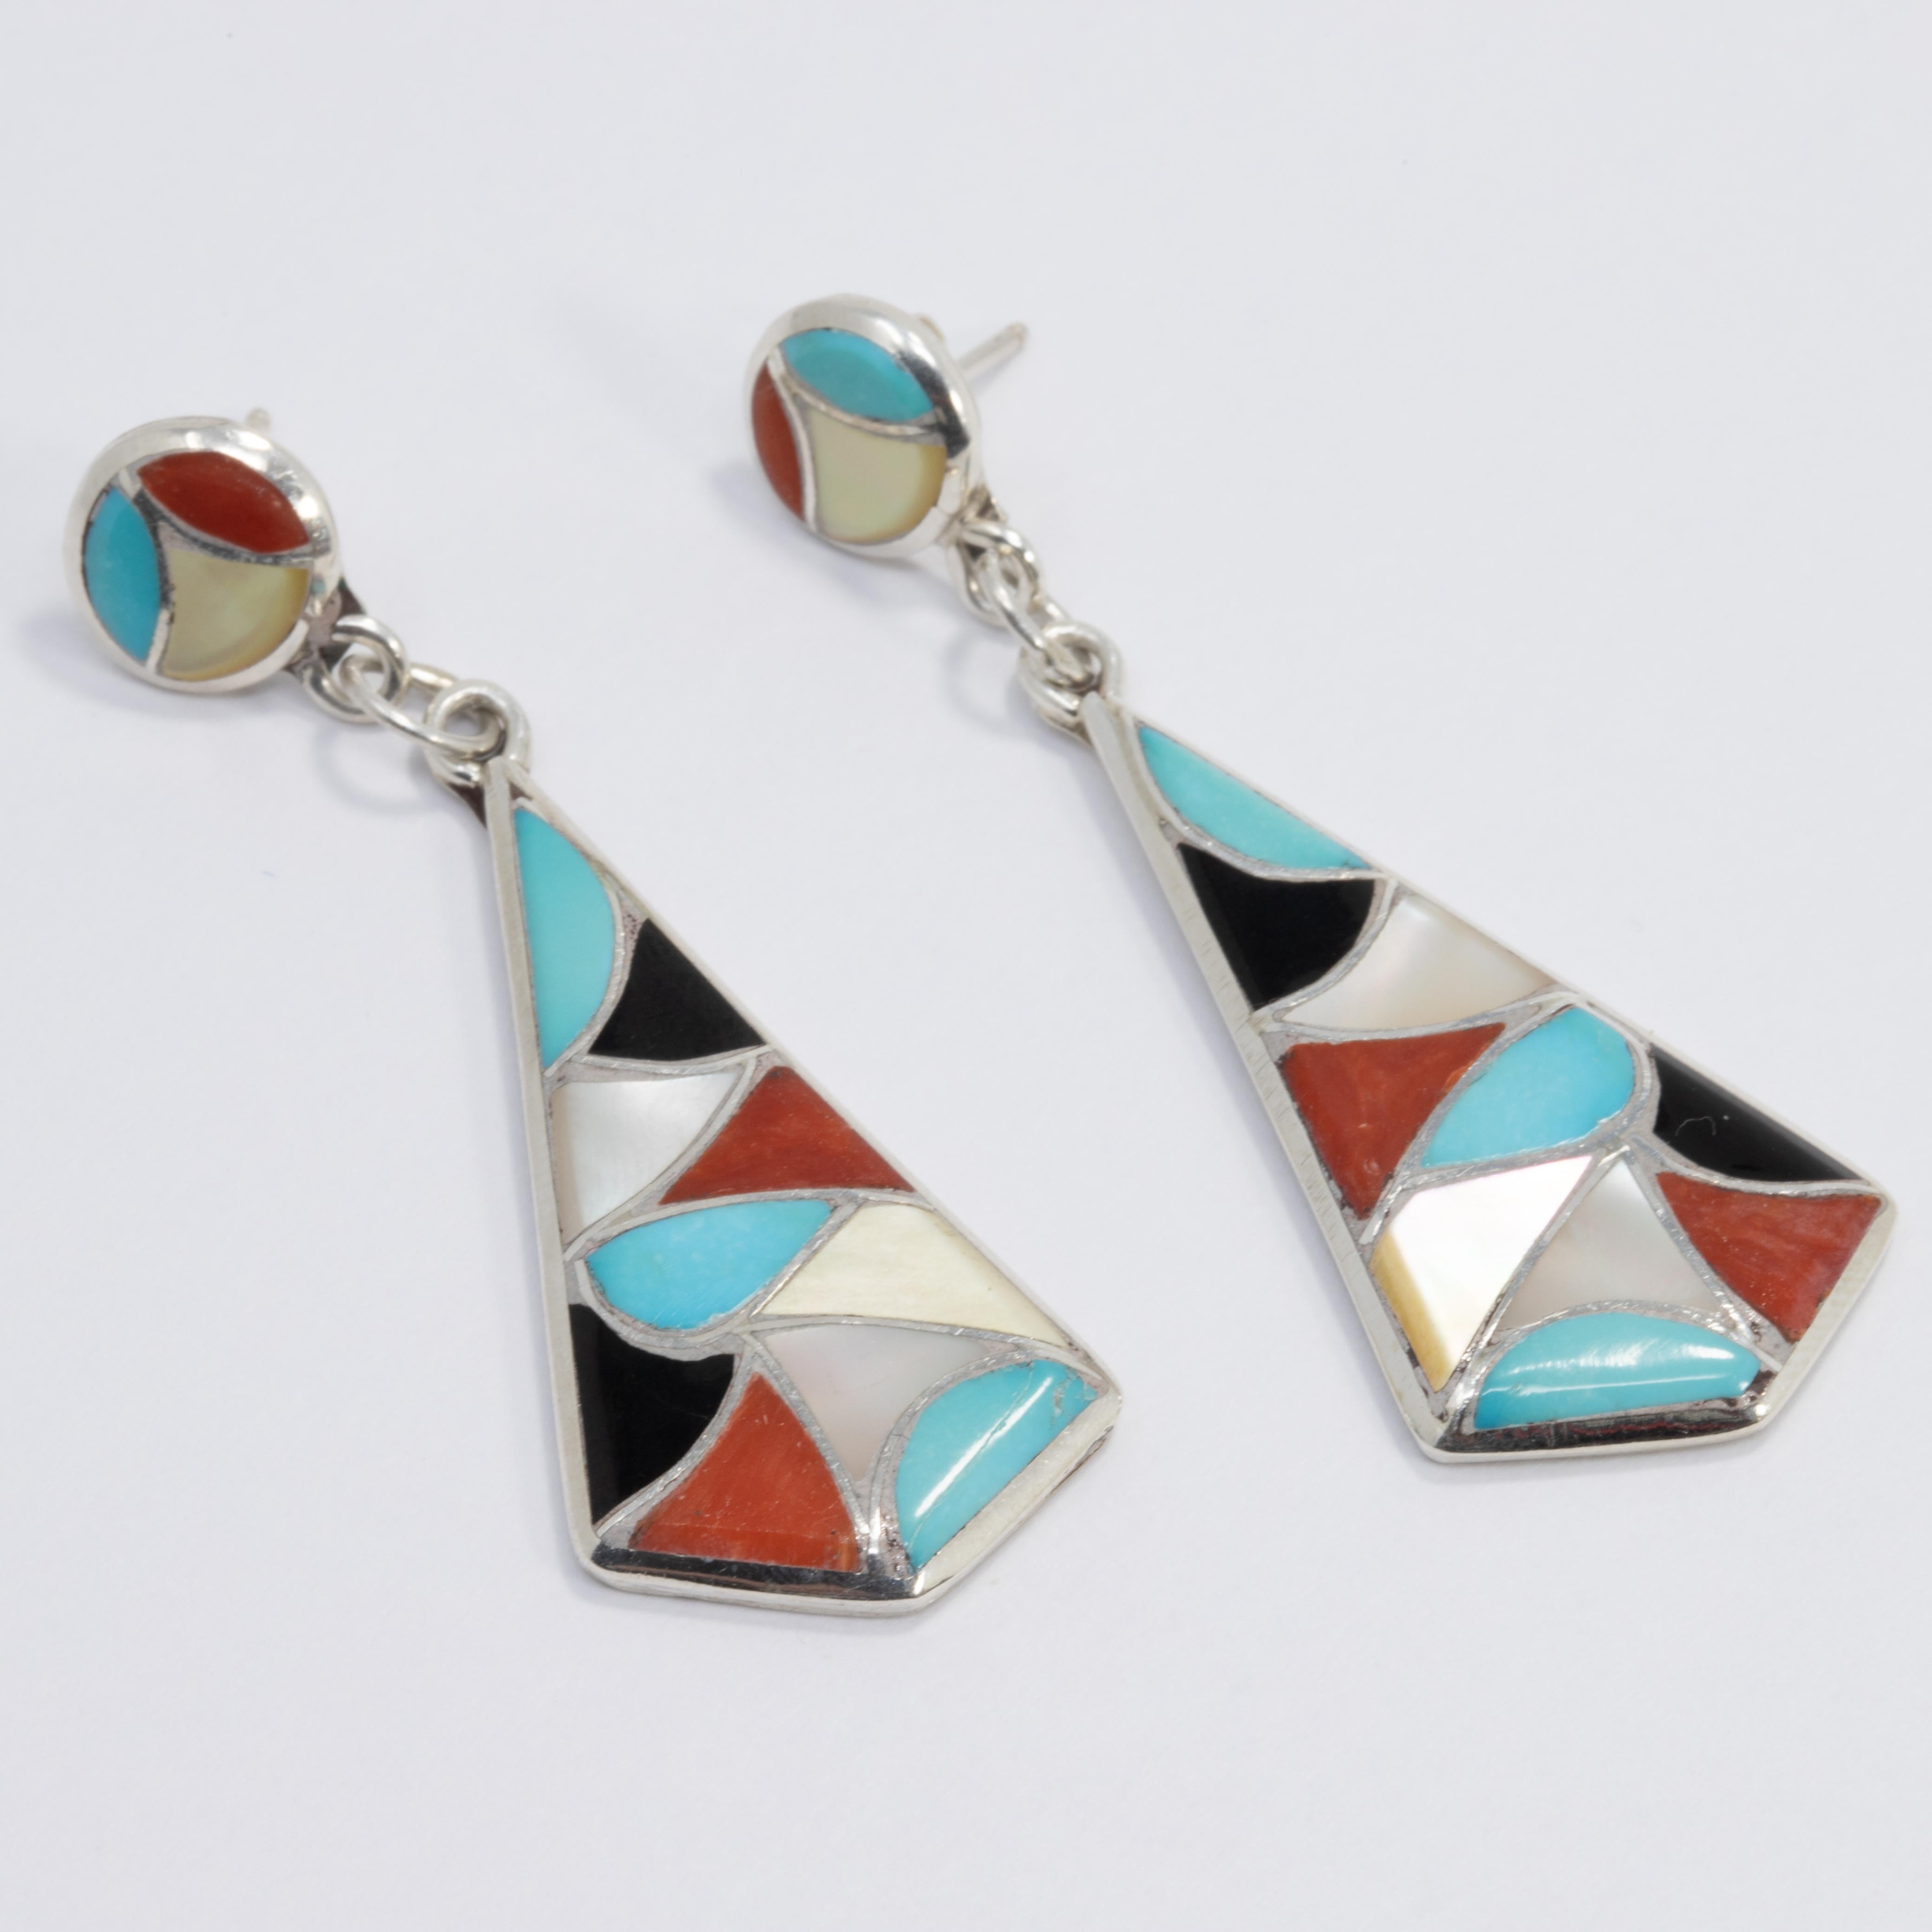 A pair of Native American Zuni dangling earrings featuring mosaic-style turquoise, coral, jet, and mother of pearl inlays set in a sterling silver setting. Colorful dangling earrings with post backs.

Hallmarks: 925, DF